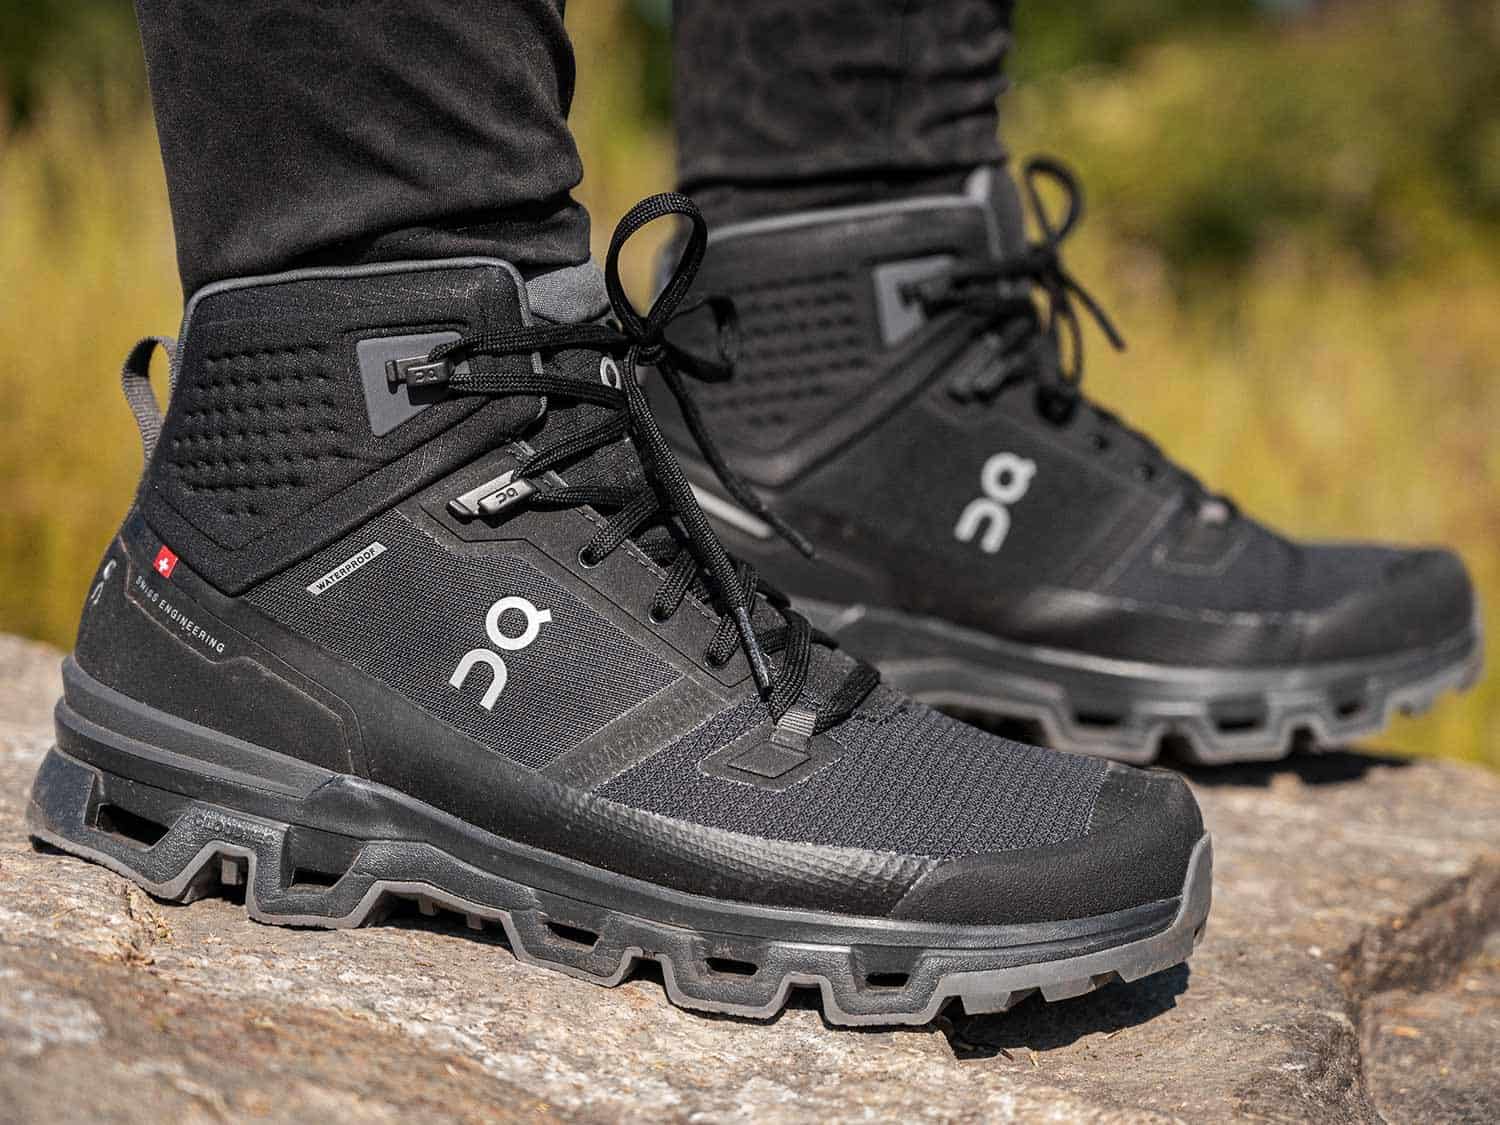 on cloudrock 2 waterproof hiking boots review